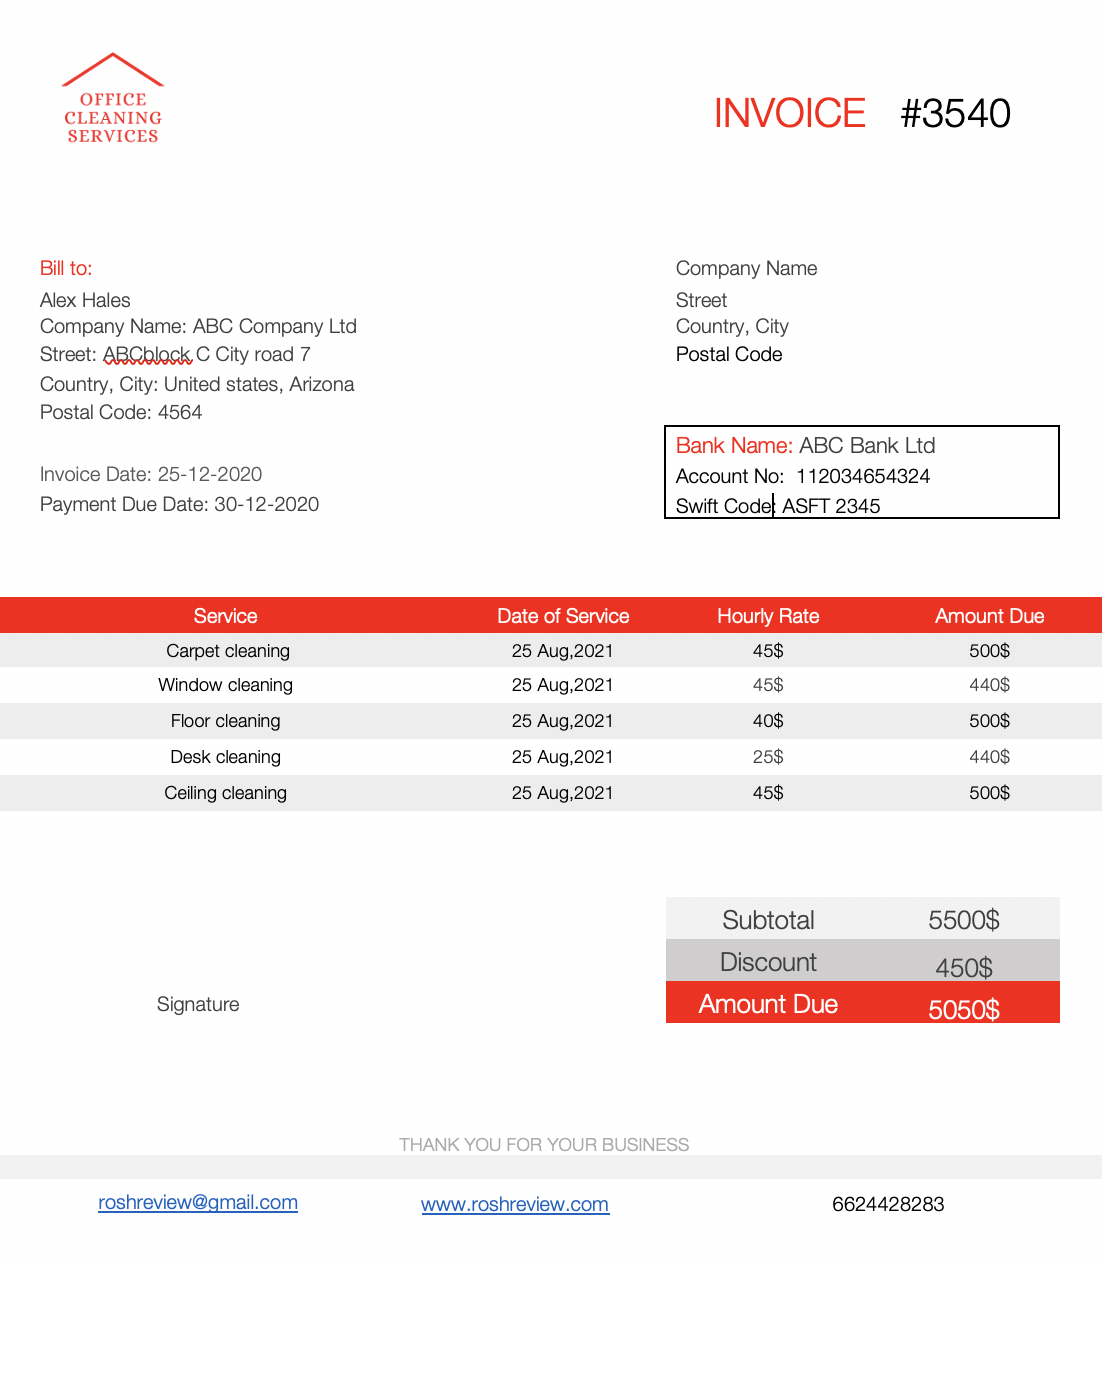 9 free cleaner invoice templates Invoice professionally!